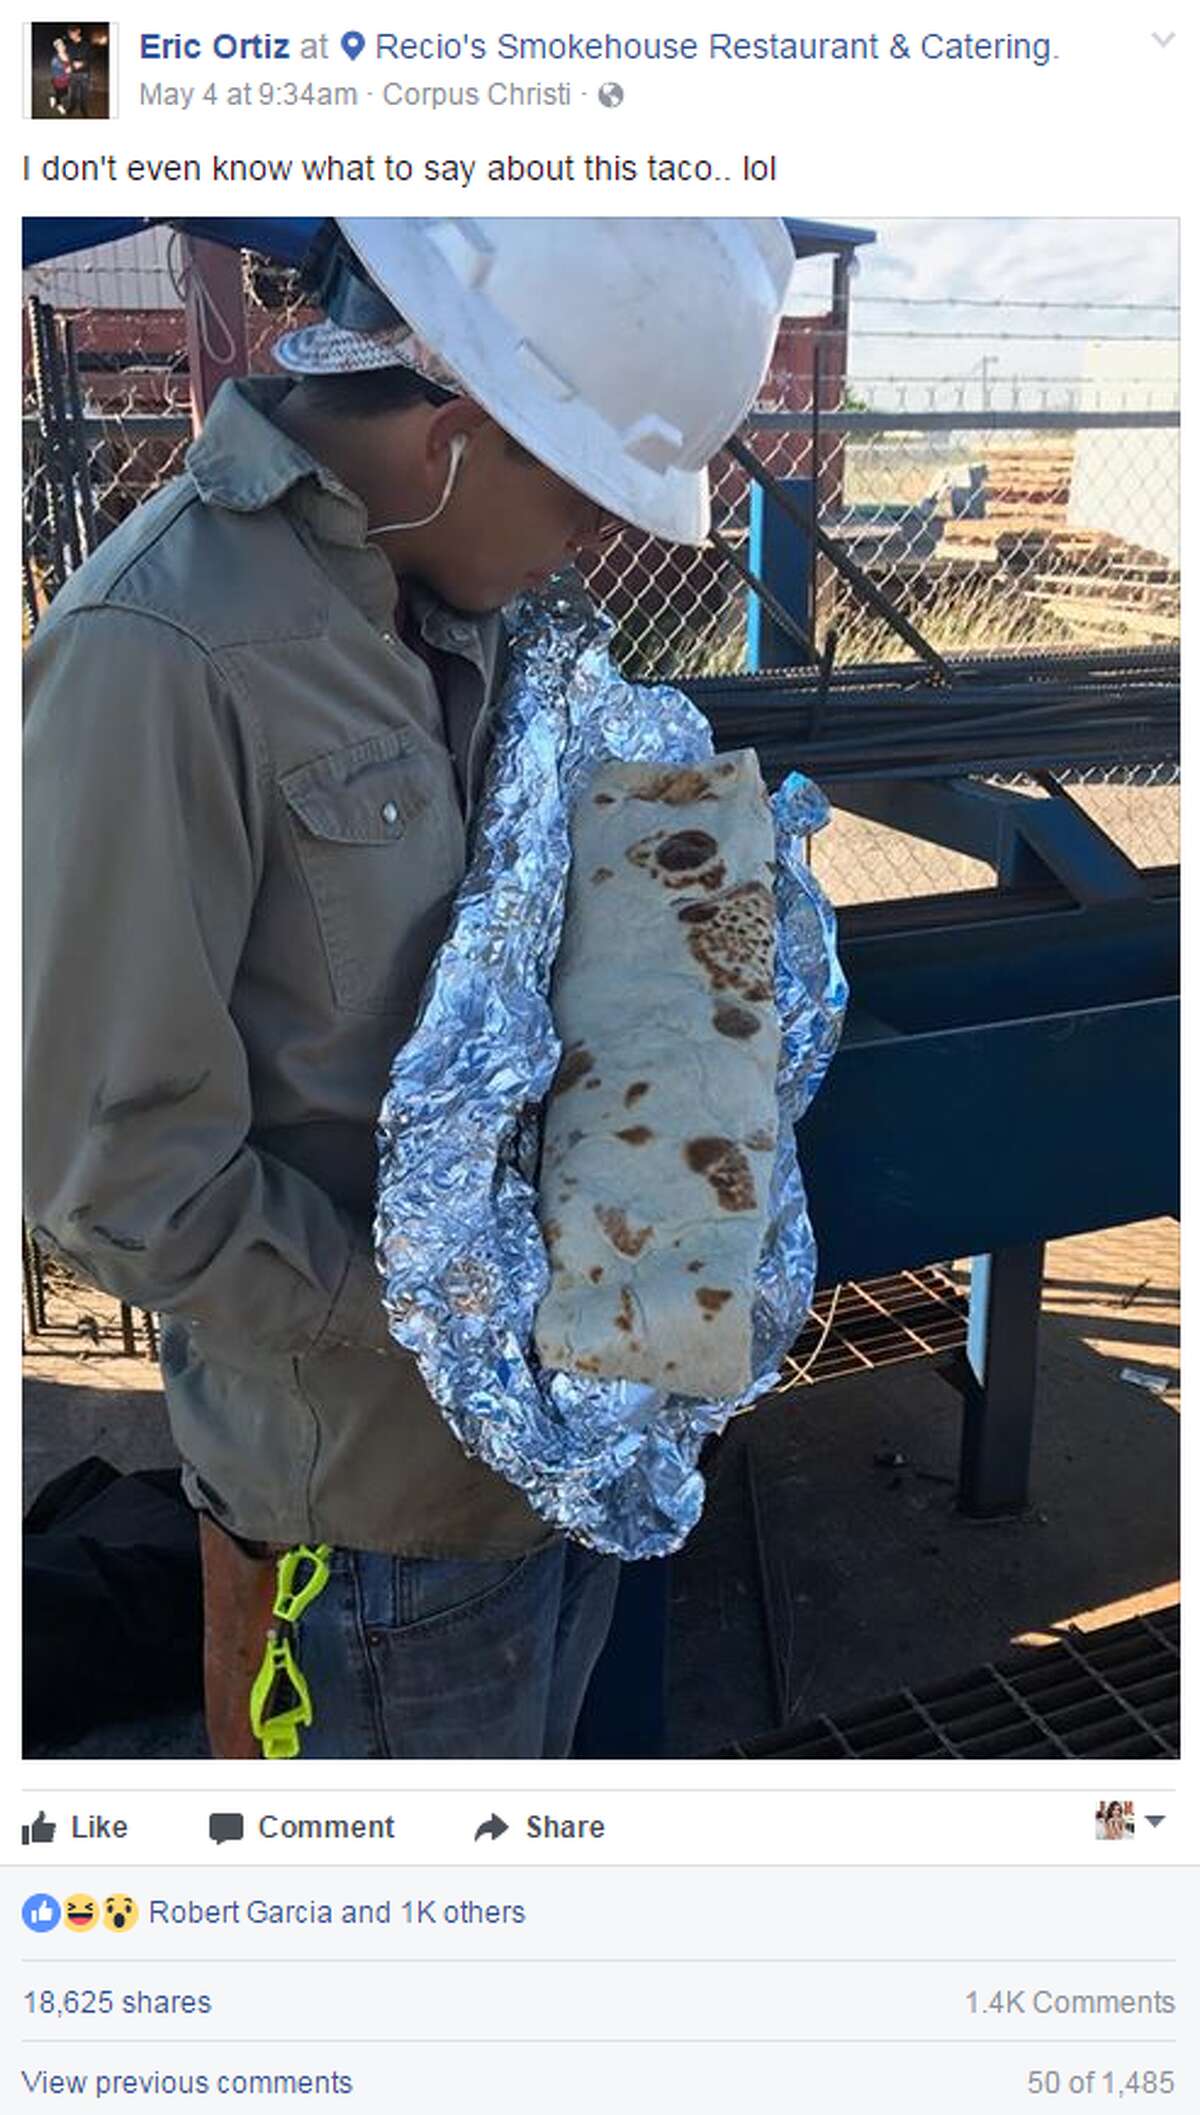 This post featuring the Recio's monstrosity by Eric Ortiz last week went viral with over 18,000 shares. Click through to see more photos of the giant taco that only a few have conquered in one sitting.